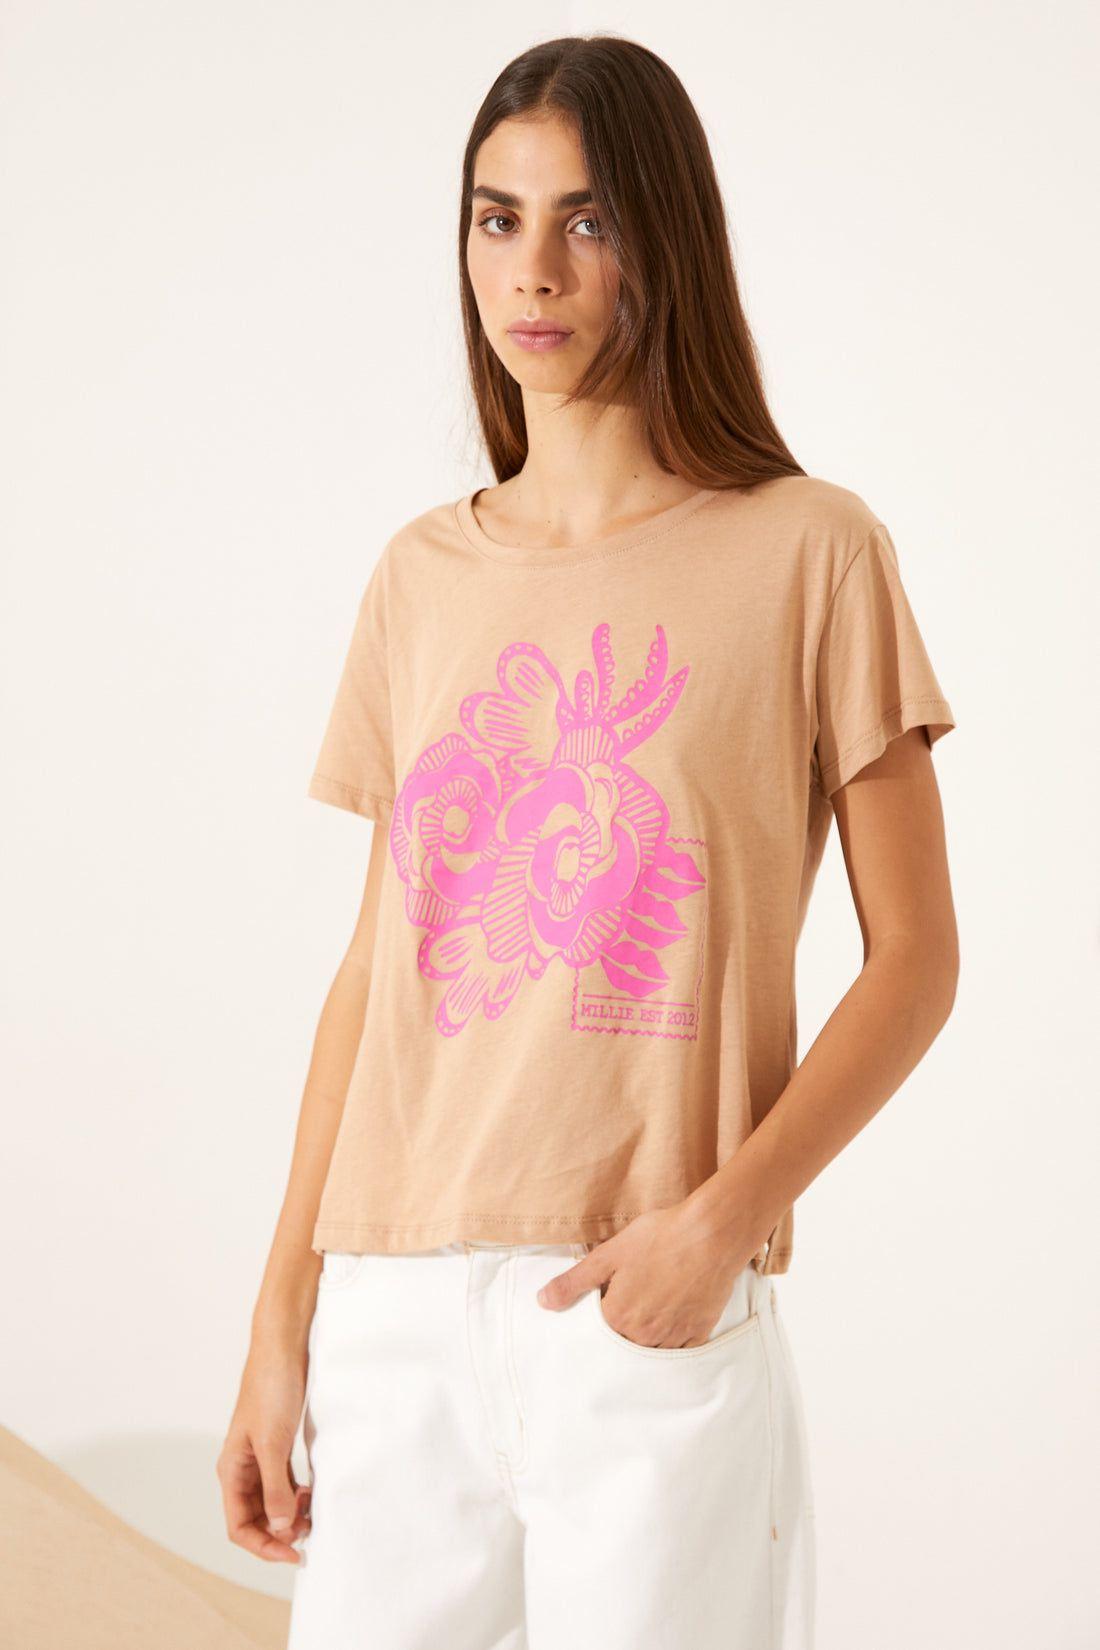 REMERA FLY camel s/m